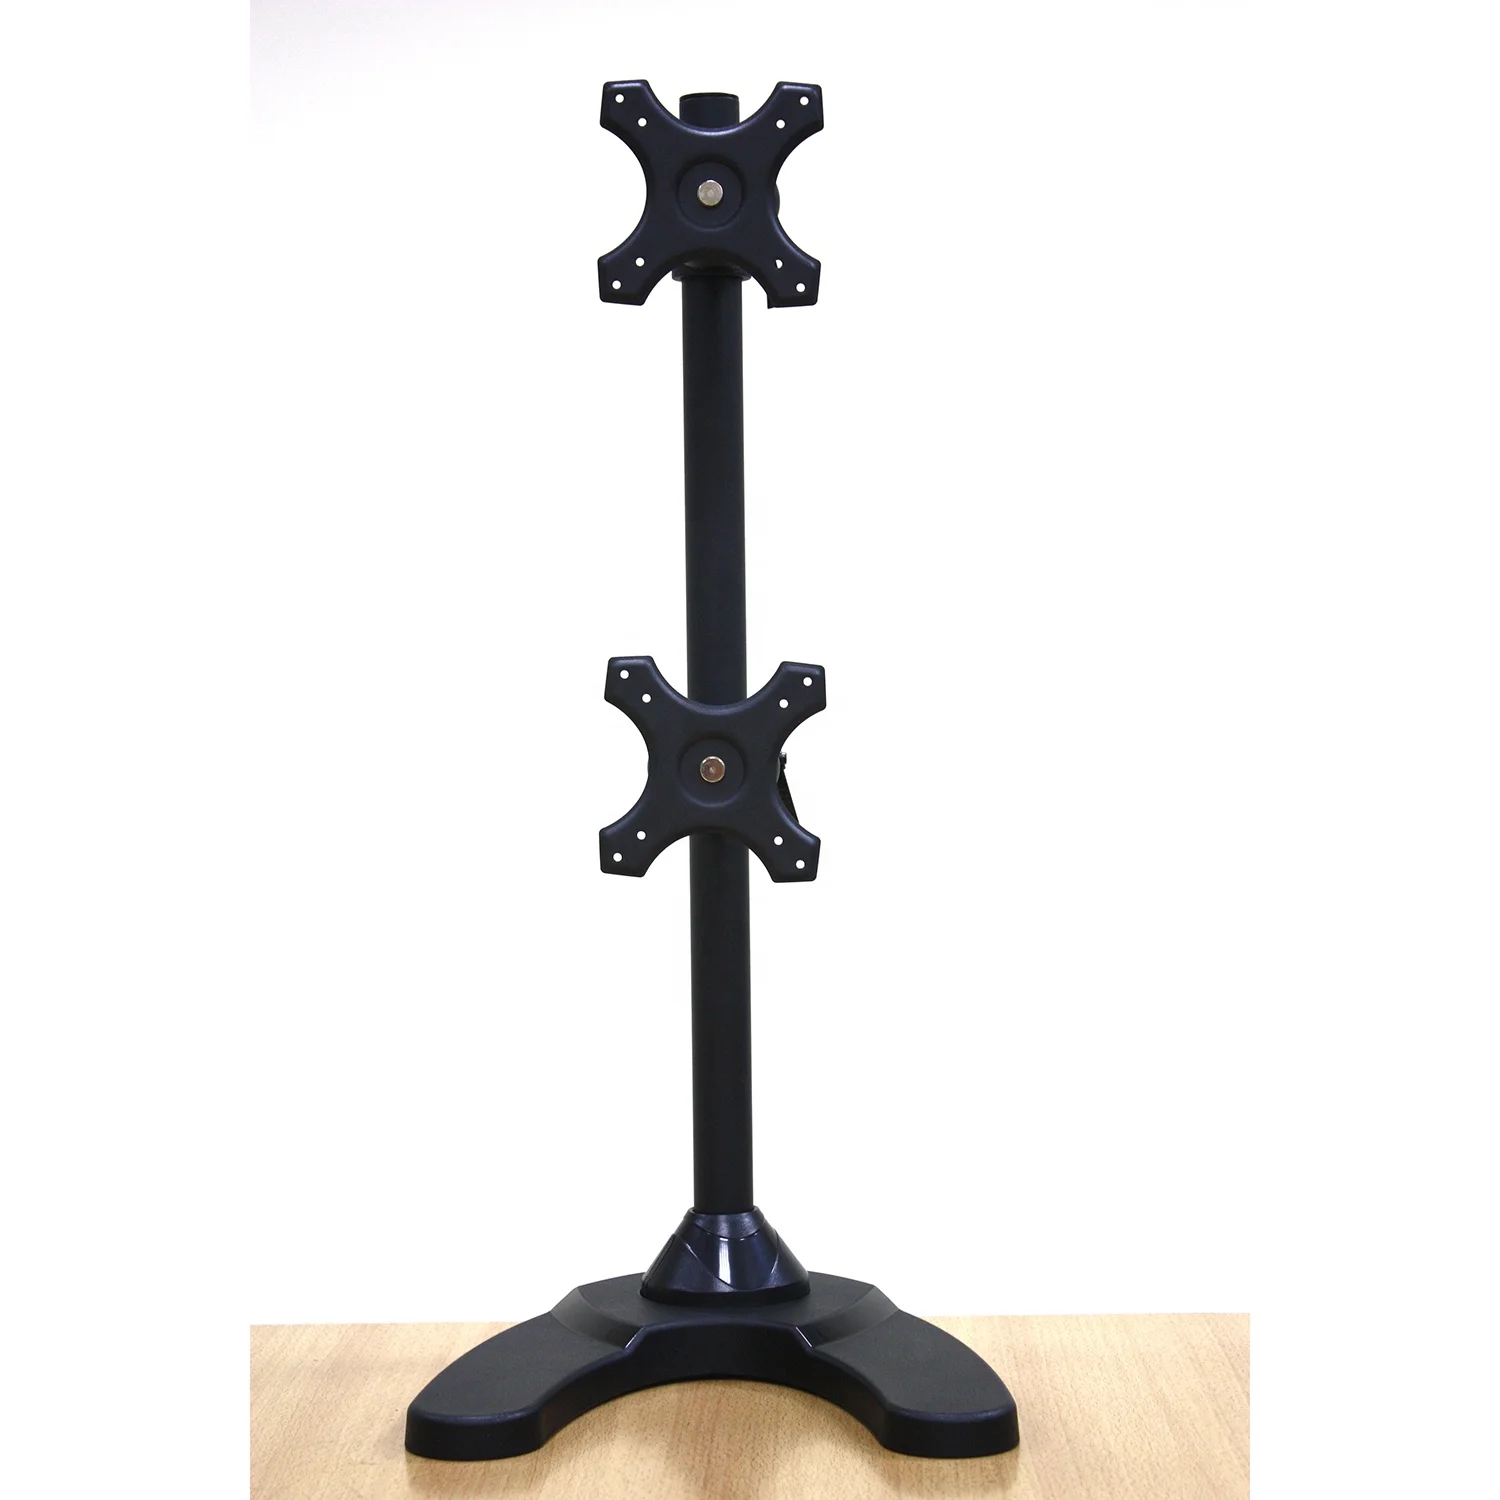 Dual Freestanding Vertical Monitor Stand holds monitors up to 24